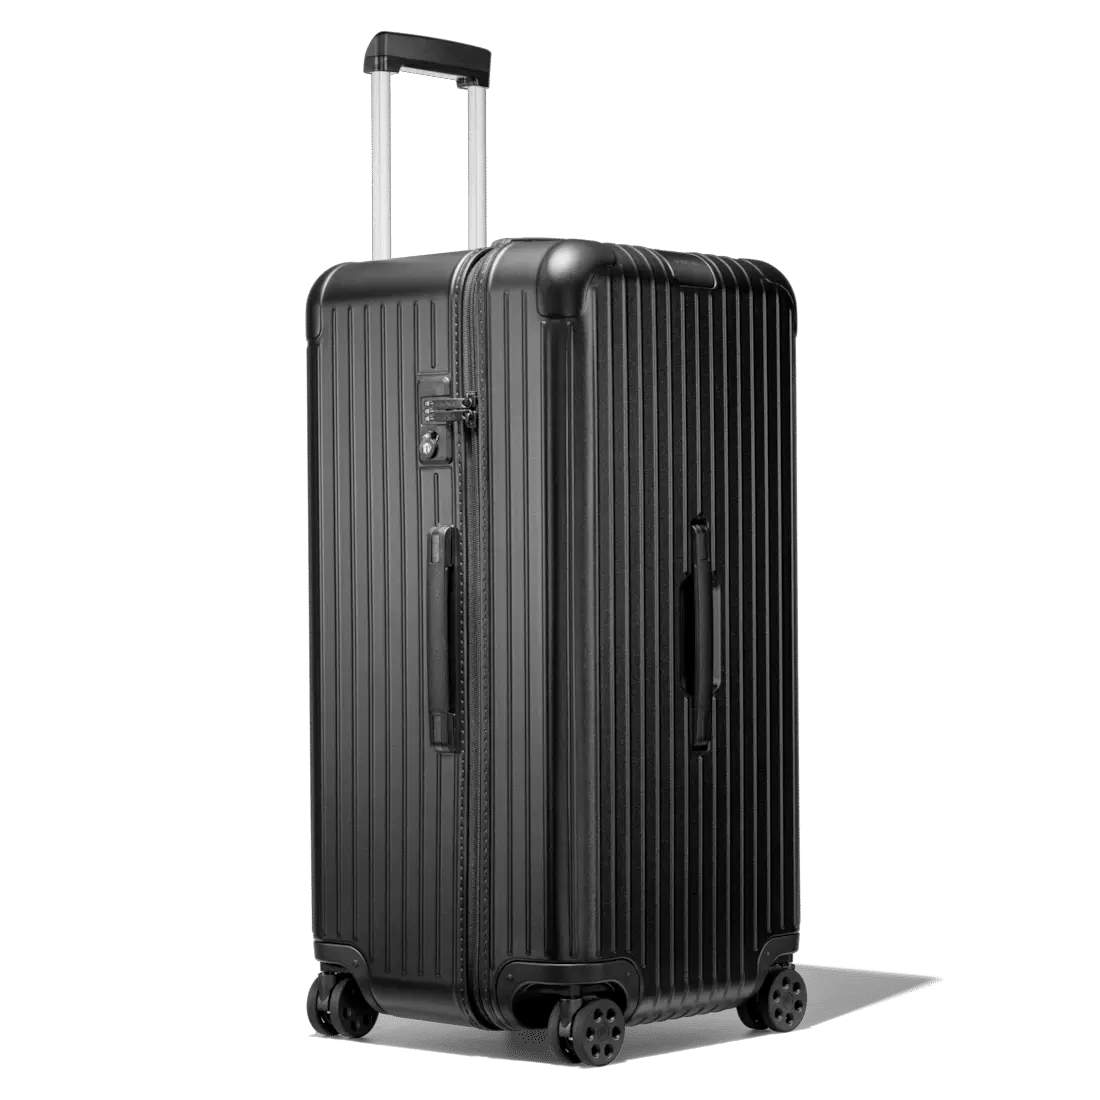 Breaking Down the Rimowa Essential Trunk – Our Take